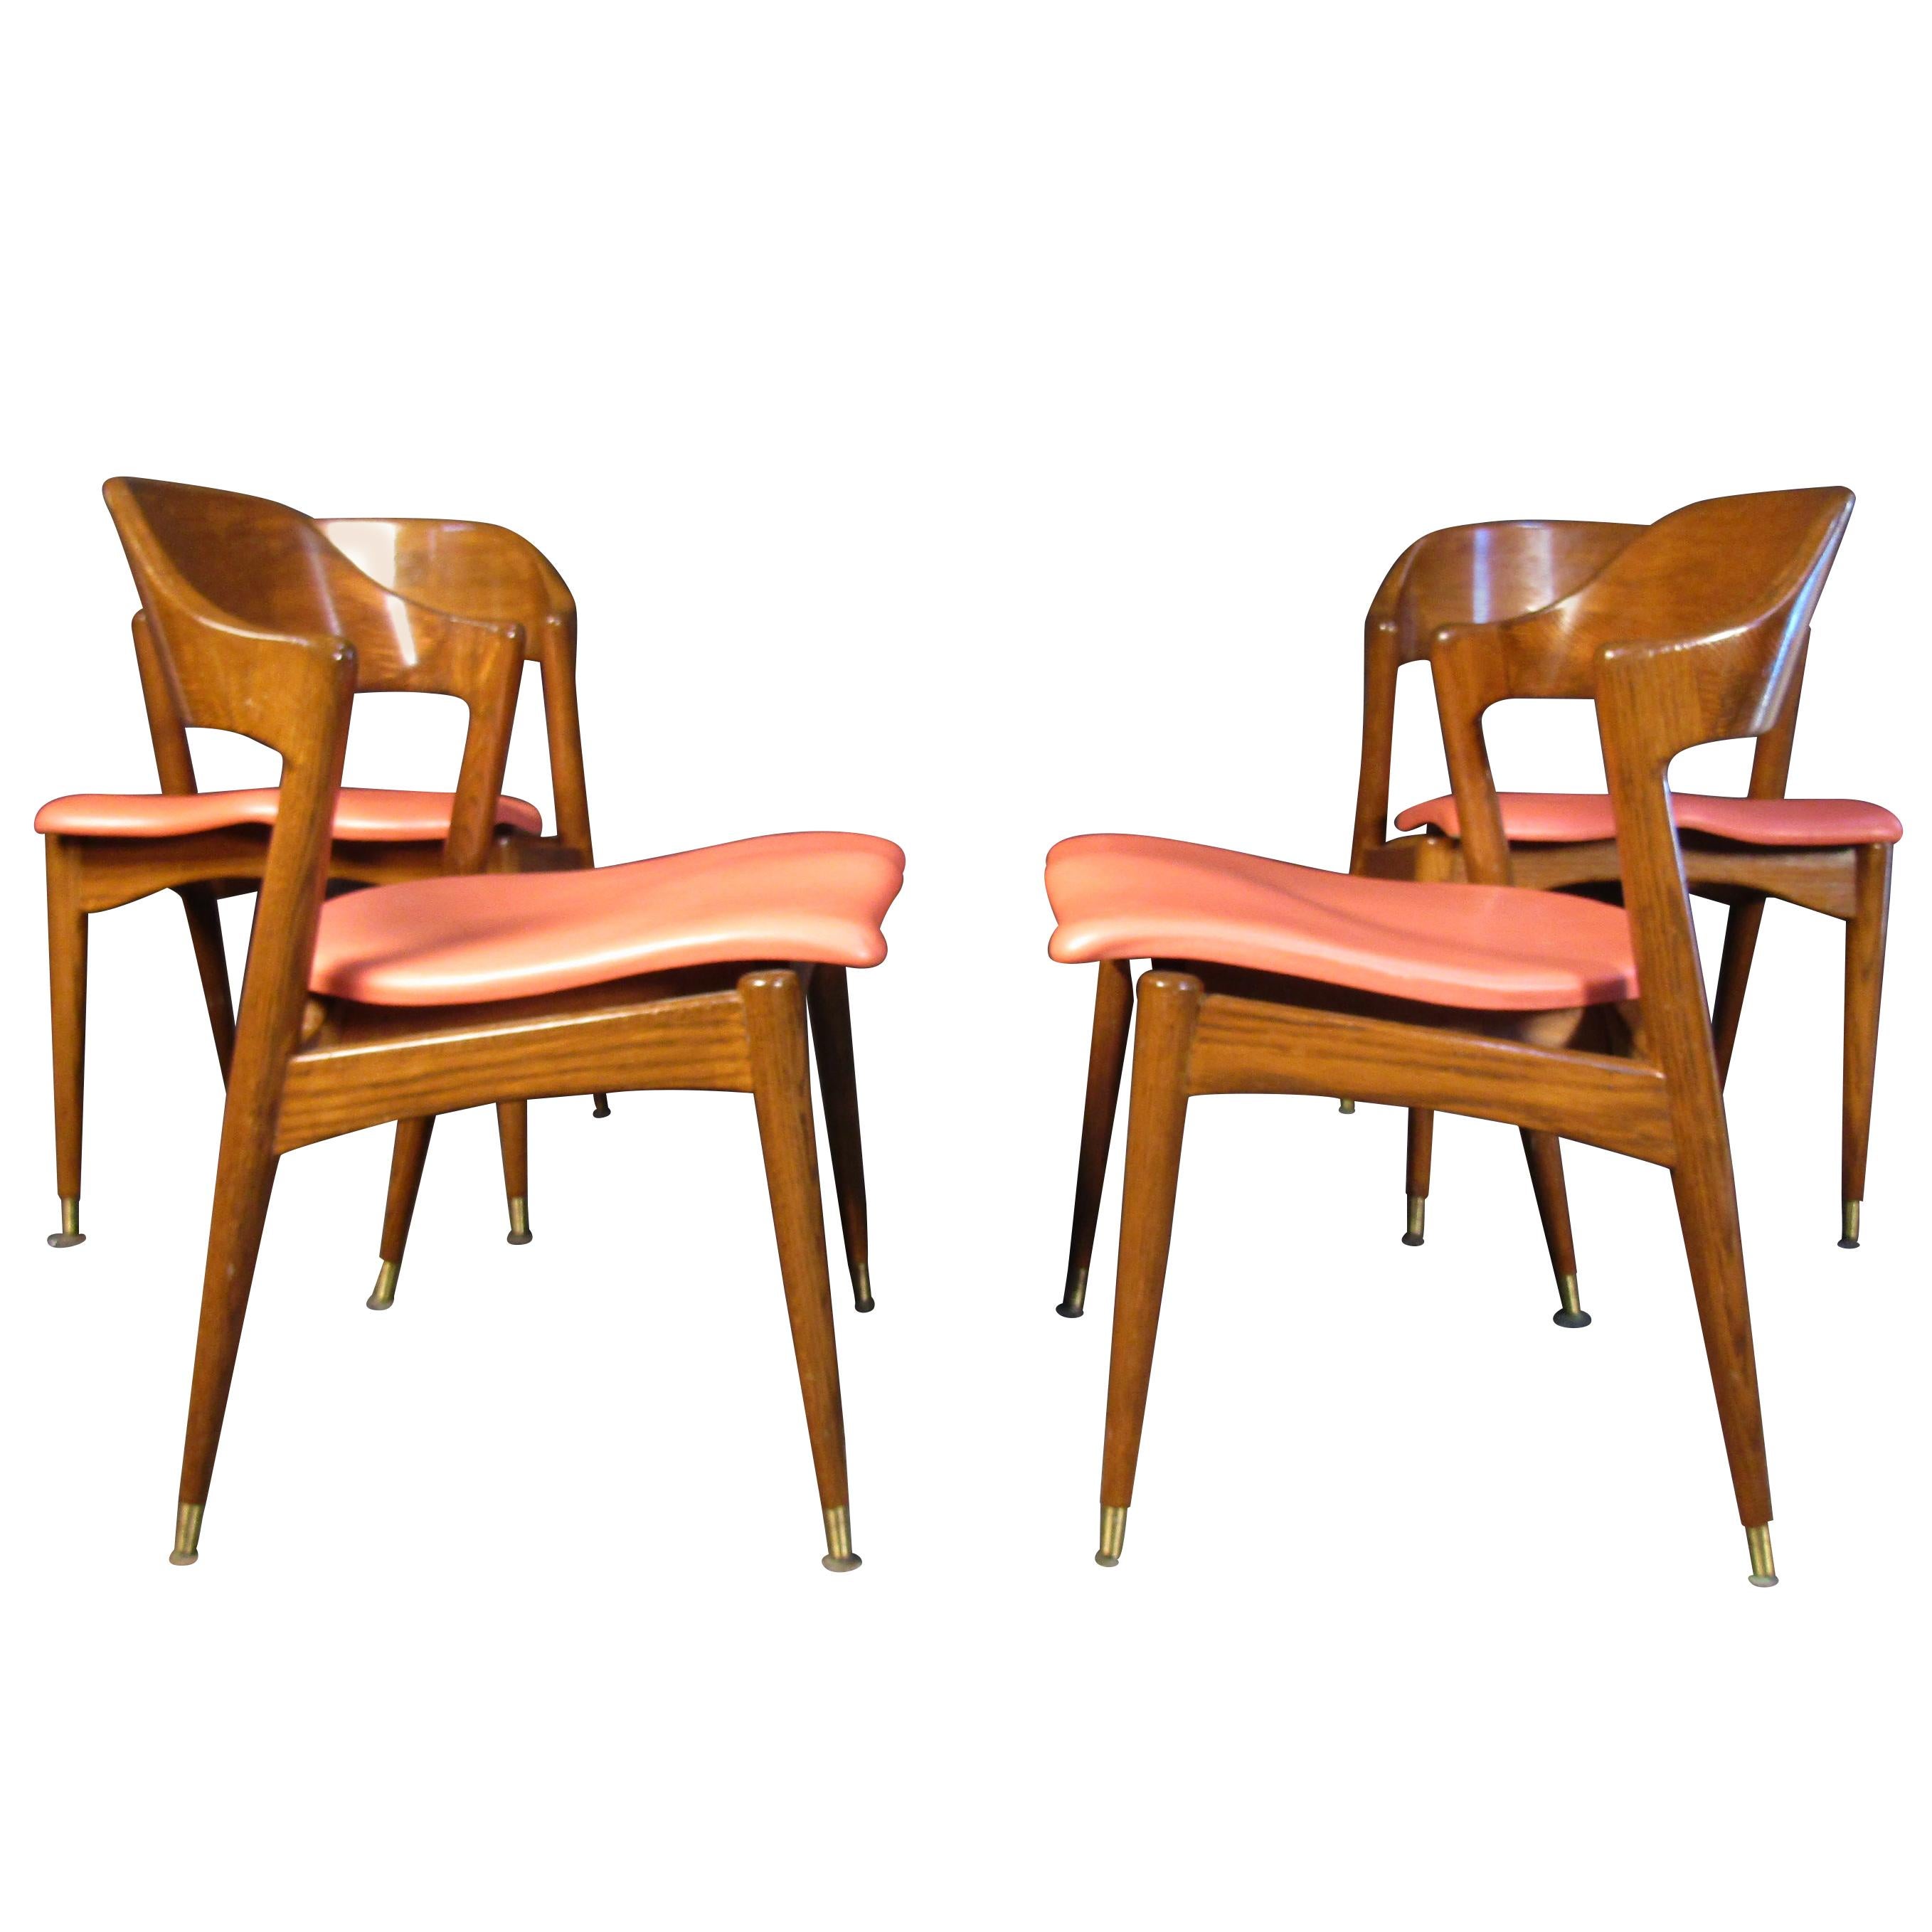 Set of Four Midcentury Walnut Chairs